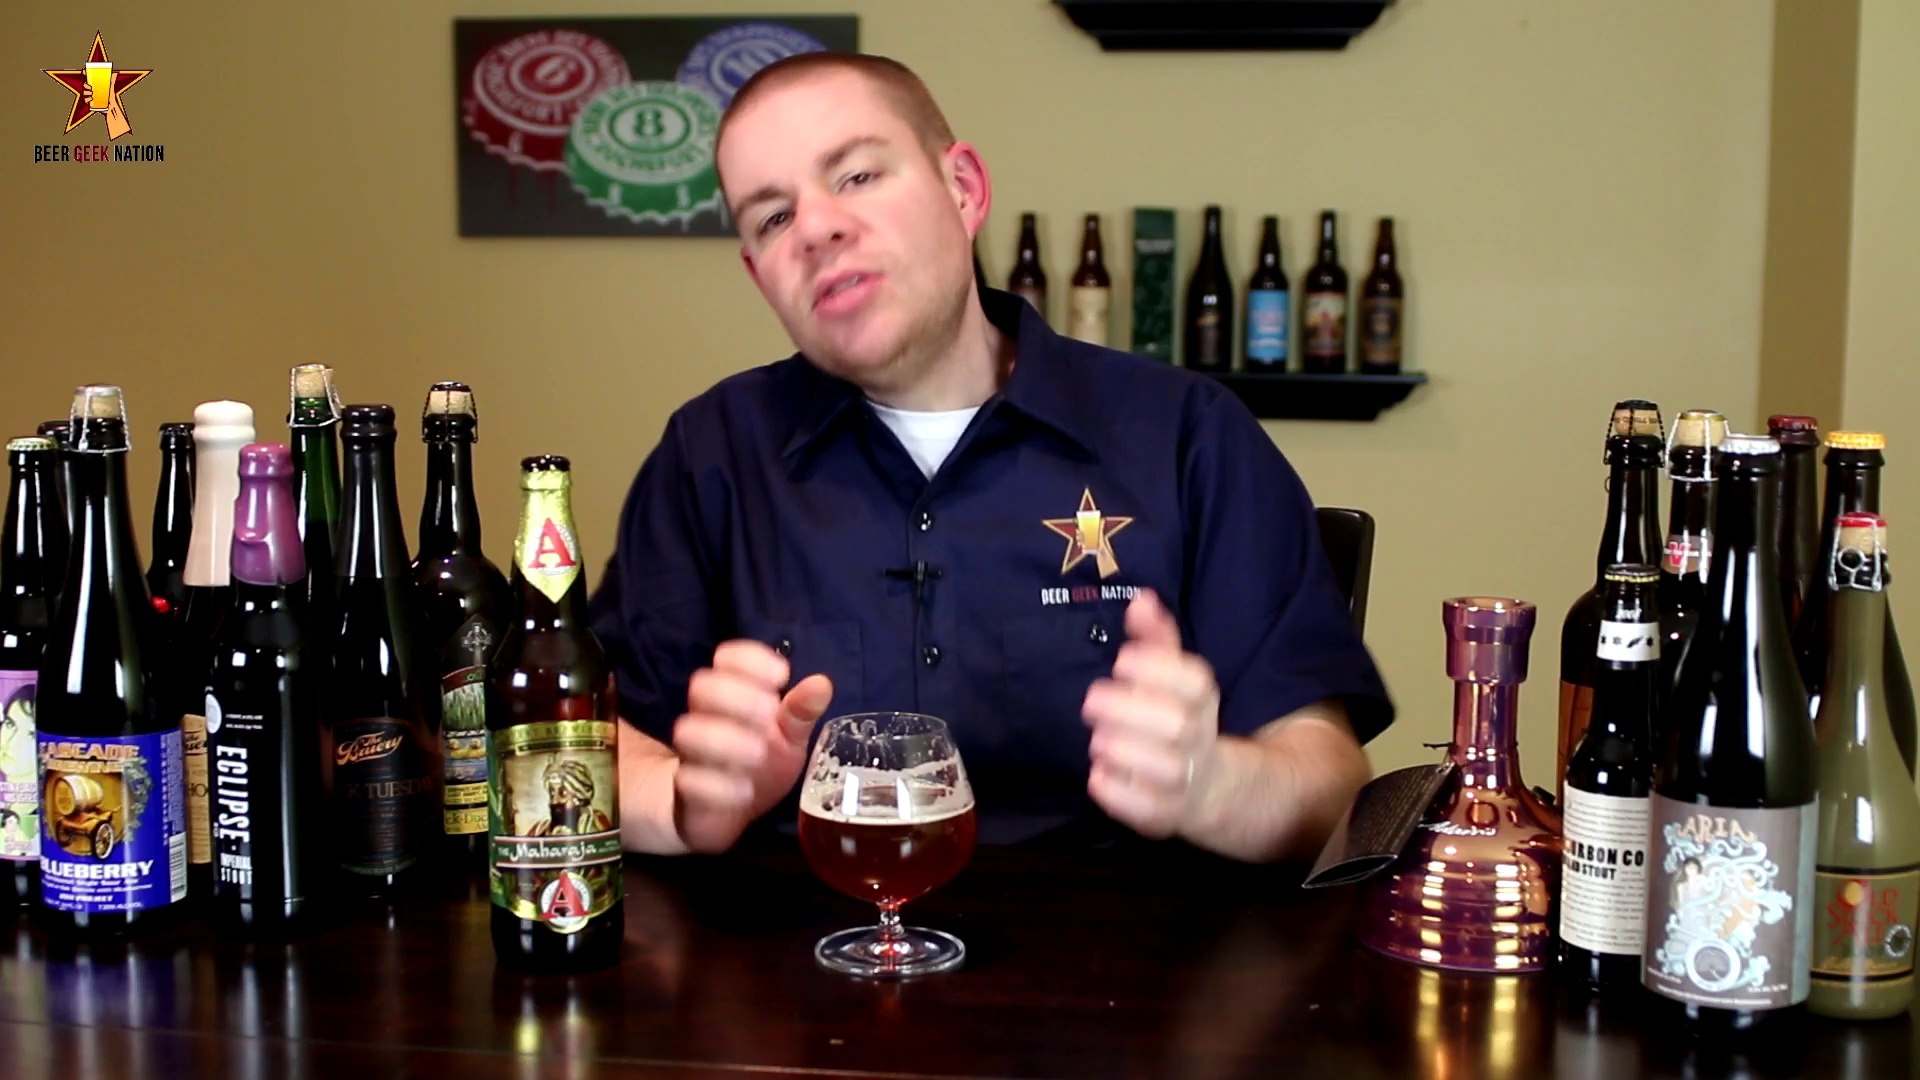 Avery The Maharaja Imperial India Pale Ale (2014) | Beer Geek Nation Craft Beer Reviews